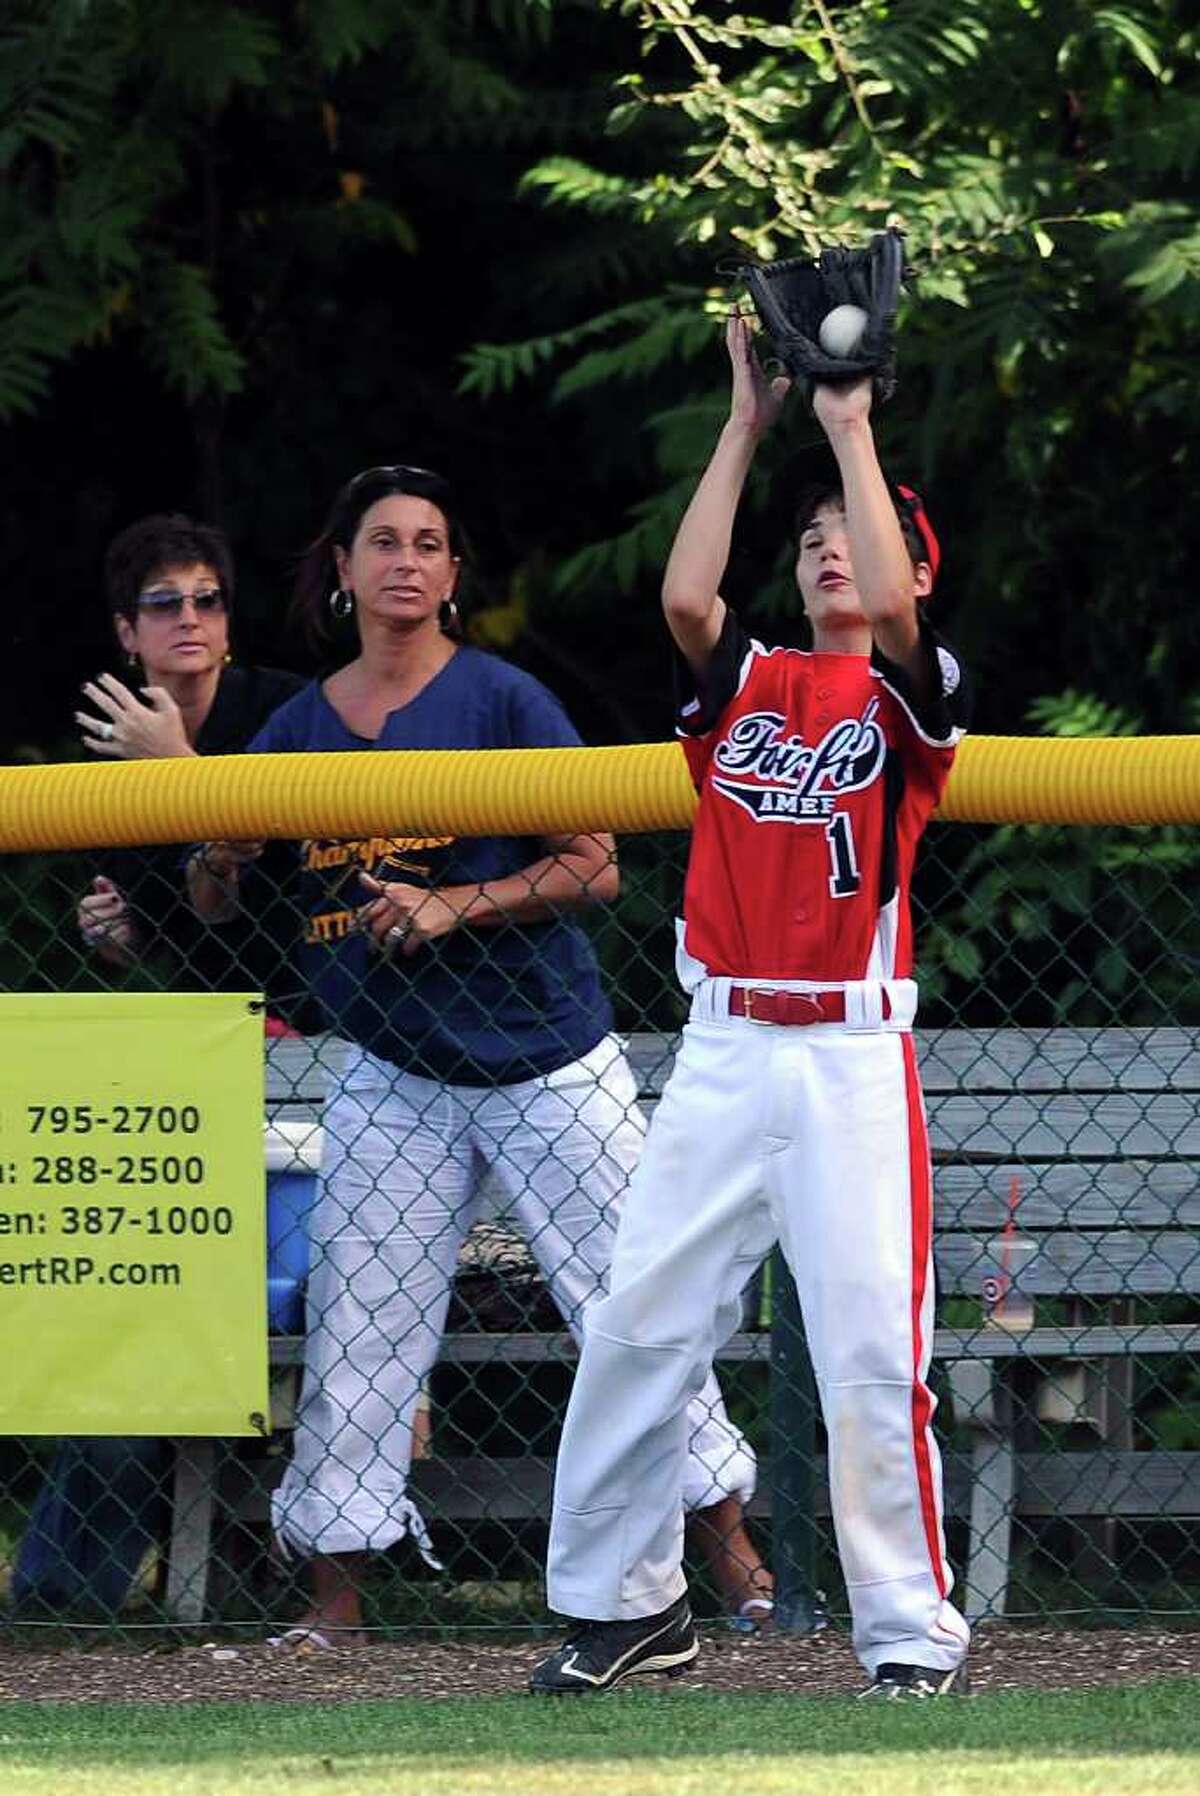 Sean Gutierrez makes a catch in the outfield during Wednesday's Fairfield American Little League Section 1 Championship game against East Haven in Orange on July 27, 3011.